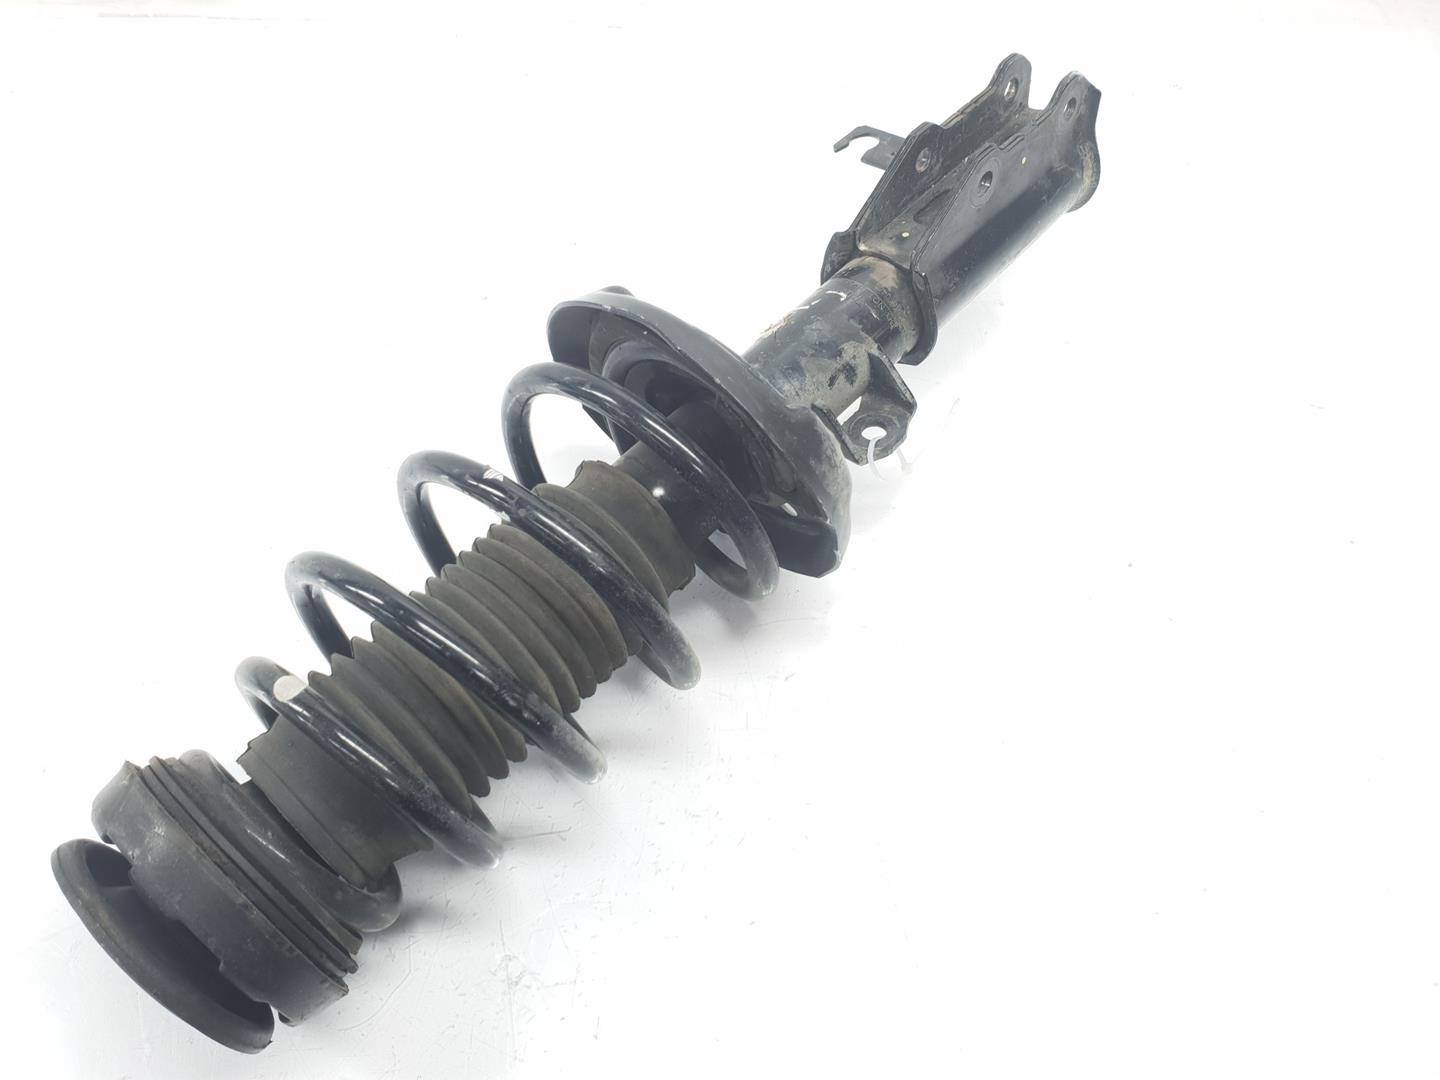 OPEL Insignia A (2008-2016) Front Right Shock Absorber 13347474, 13347474 22963199